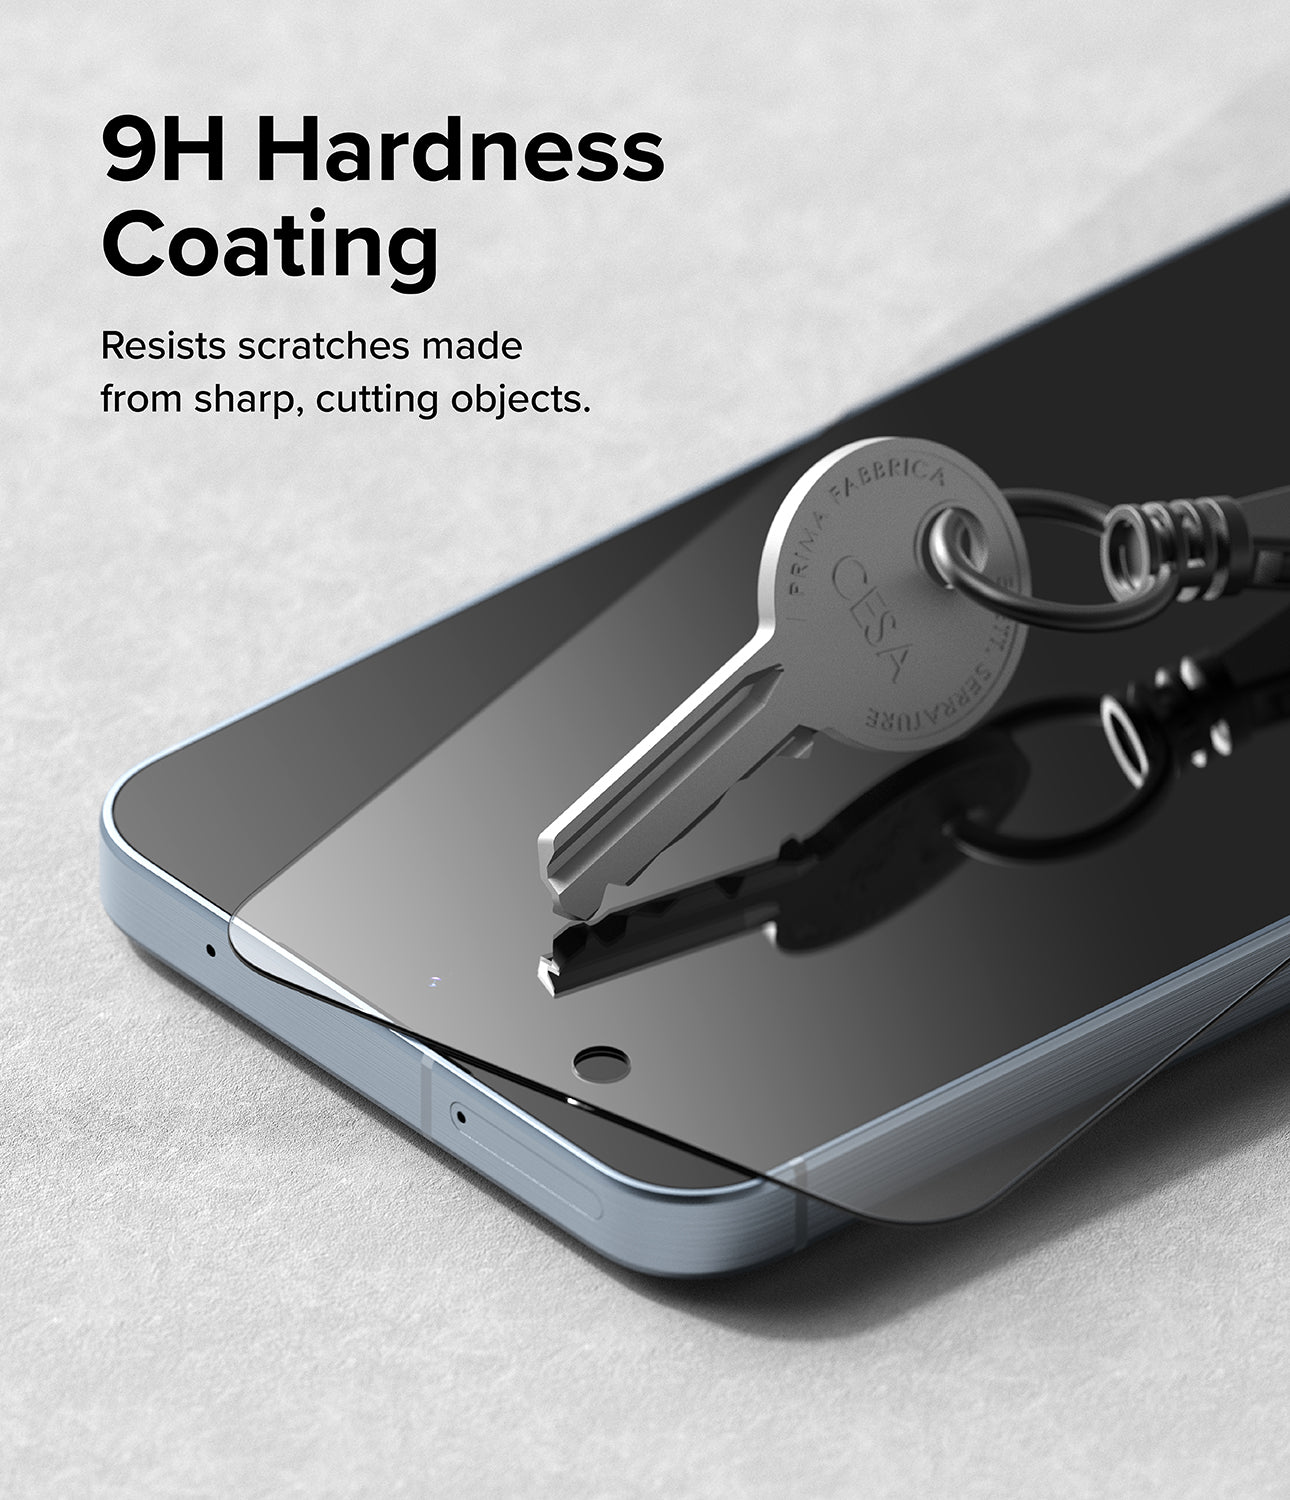 Galaxy A35 Screen Protector | Easy Slide Tempered Glass - 9H Hardness Coating. Resists scratches made from sharp, cutting objects.